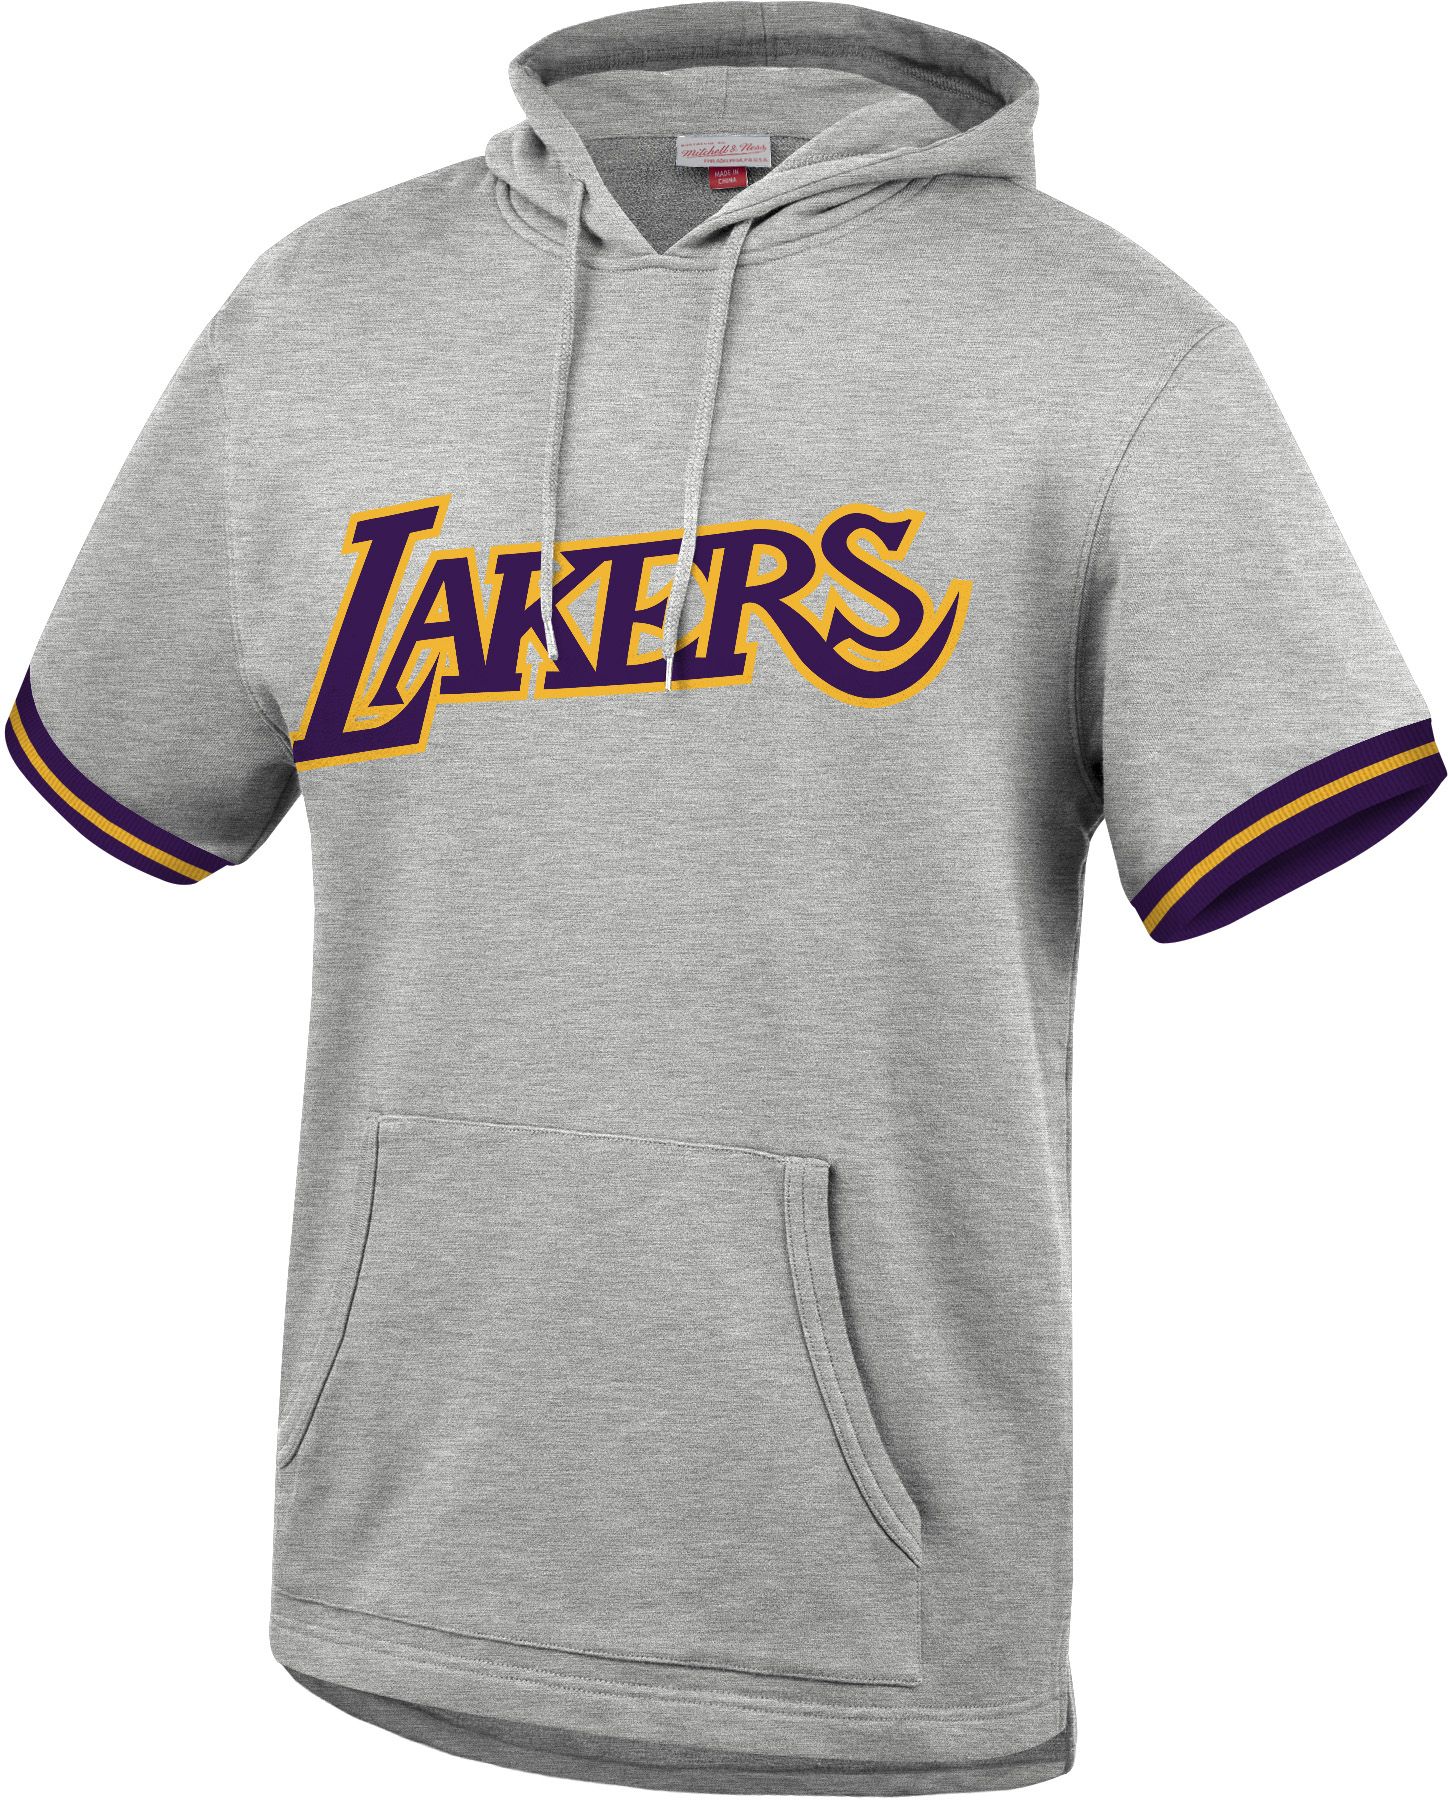 lakers hoodie mitchell and ness